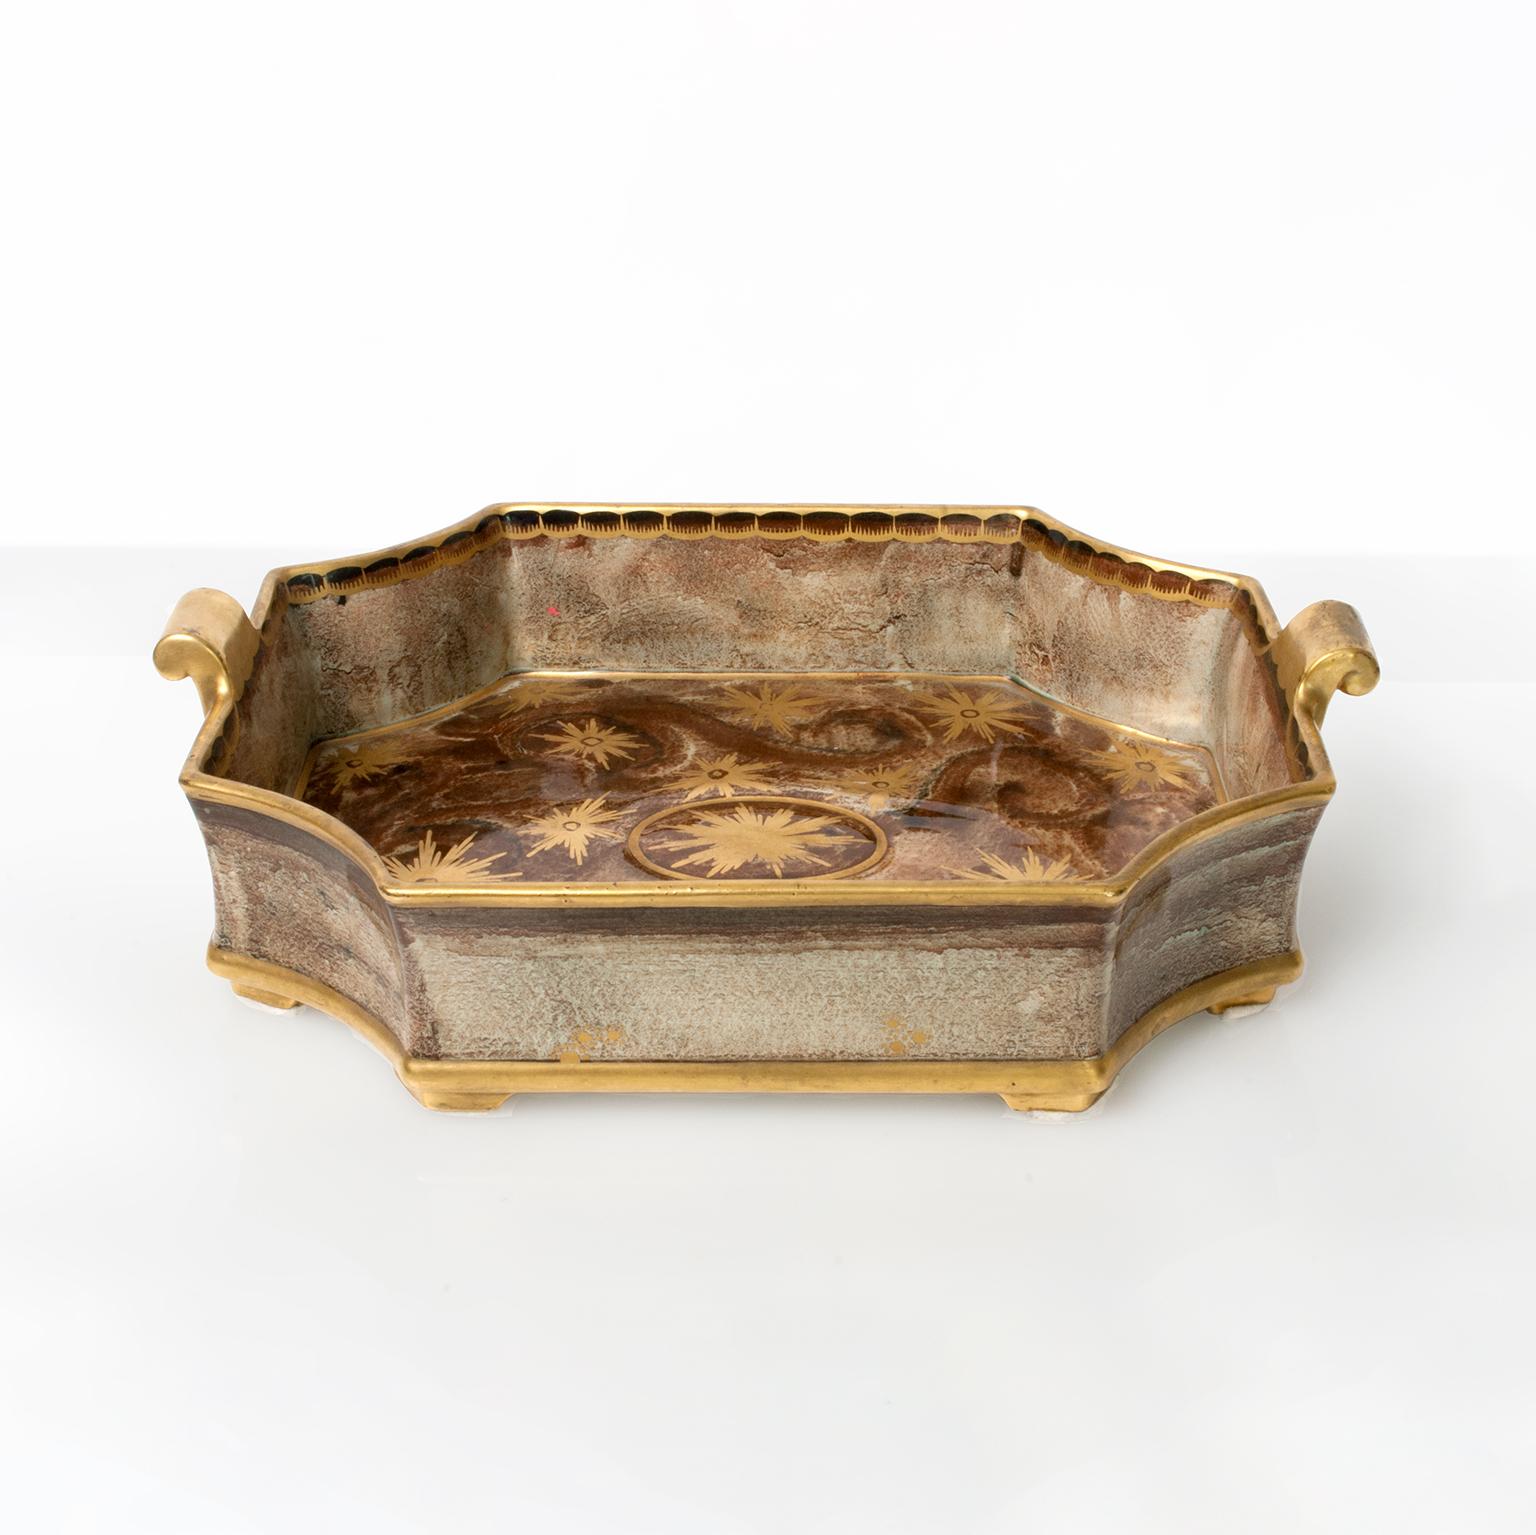 Swedish Art Deco Tray or Bowl by Josef Ekberg for Gustavsberg In Good Condition For Sale In New York, NY